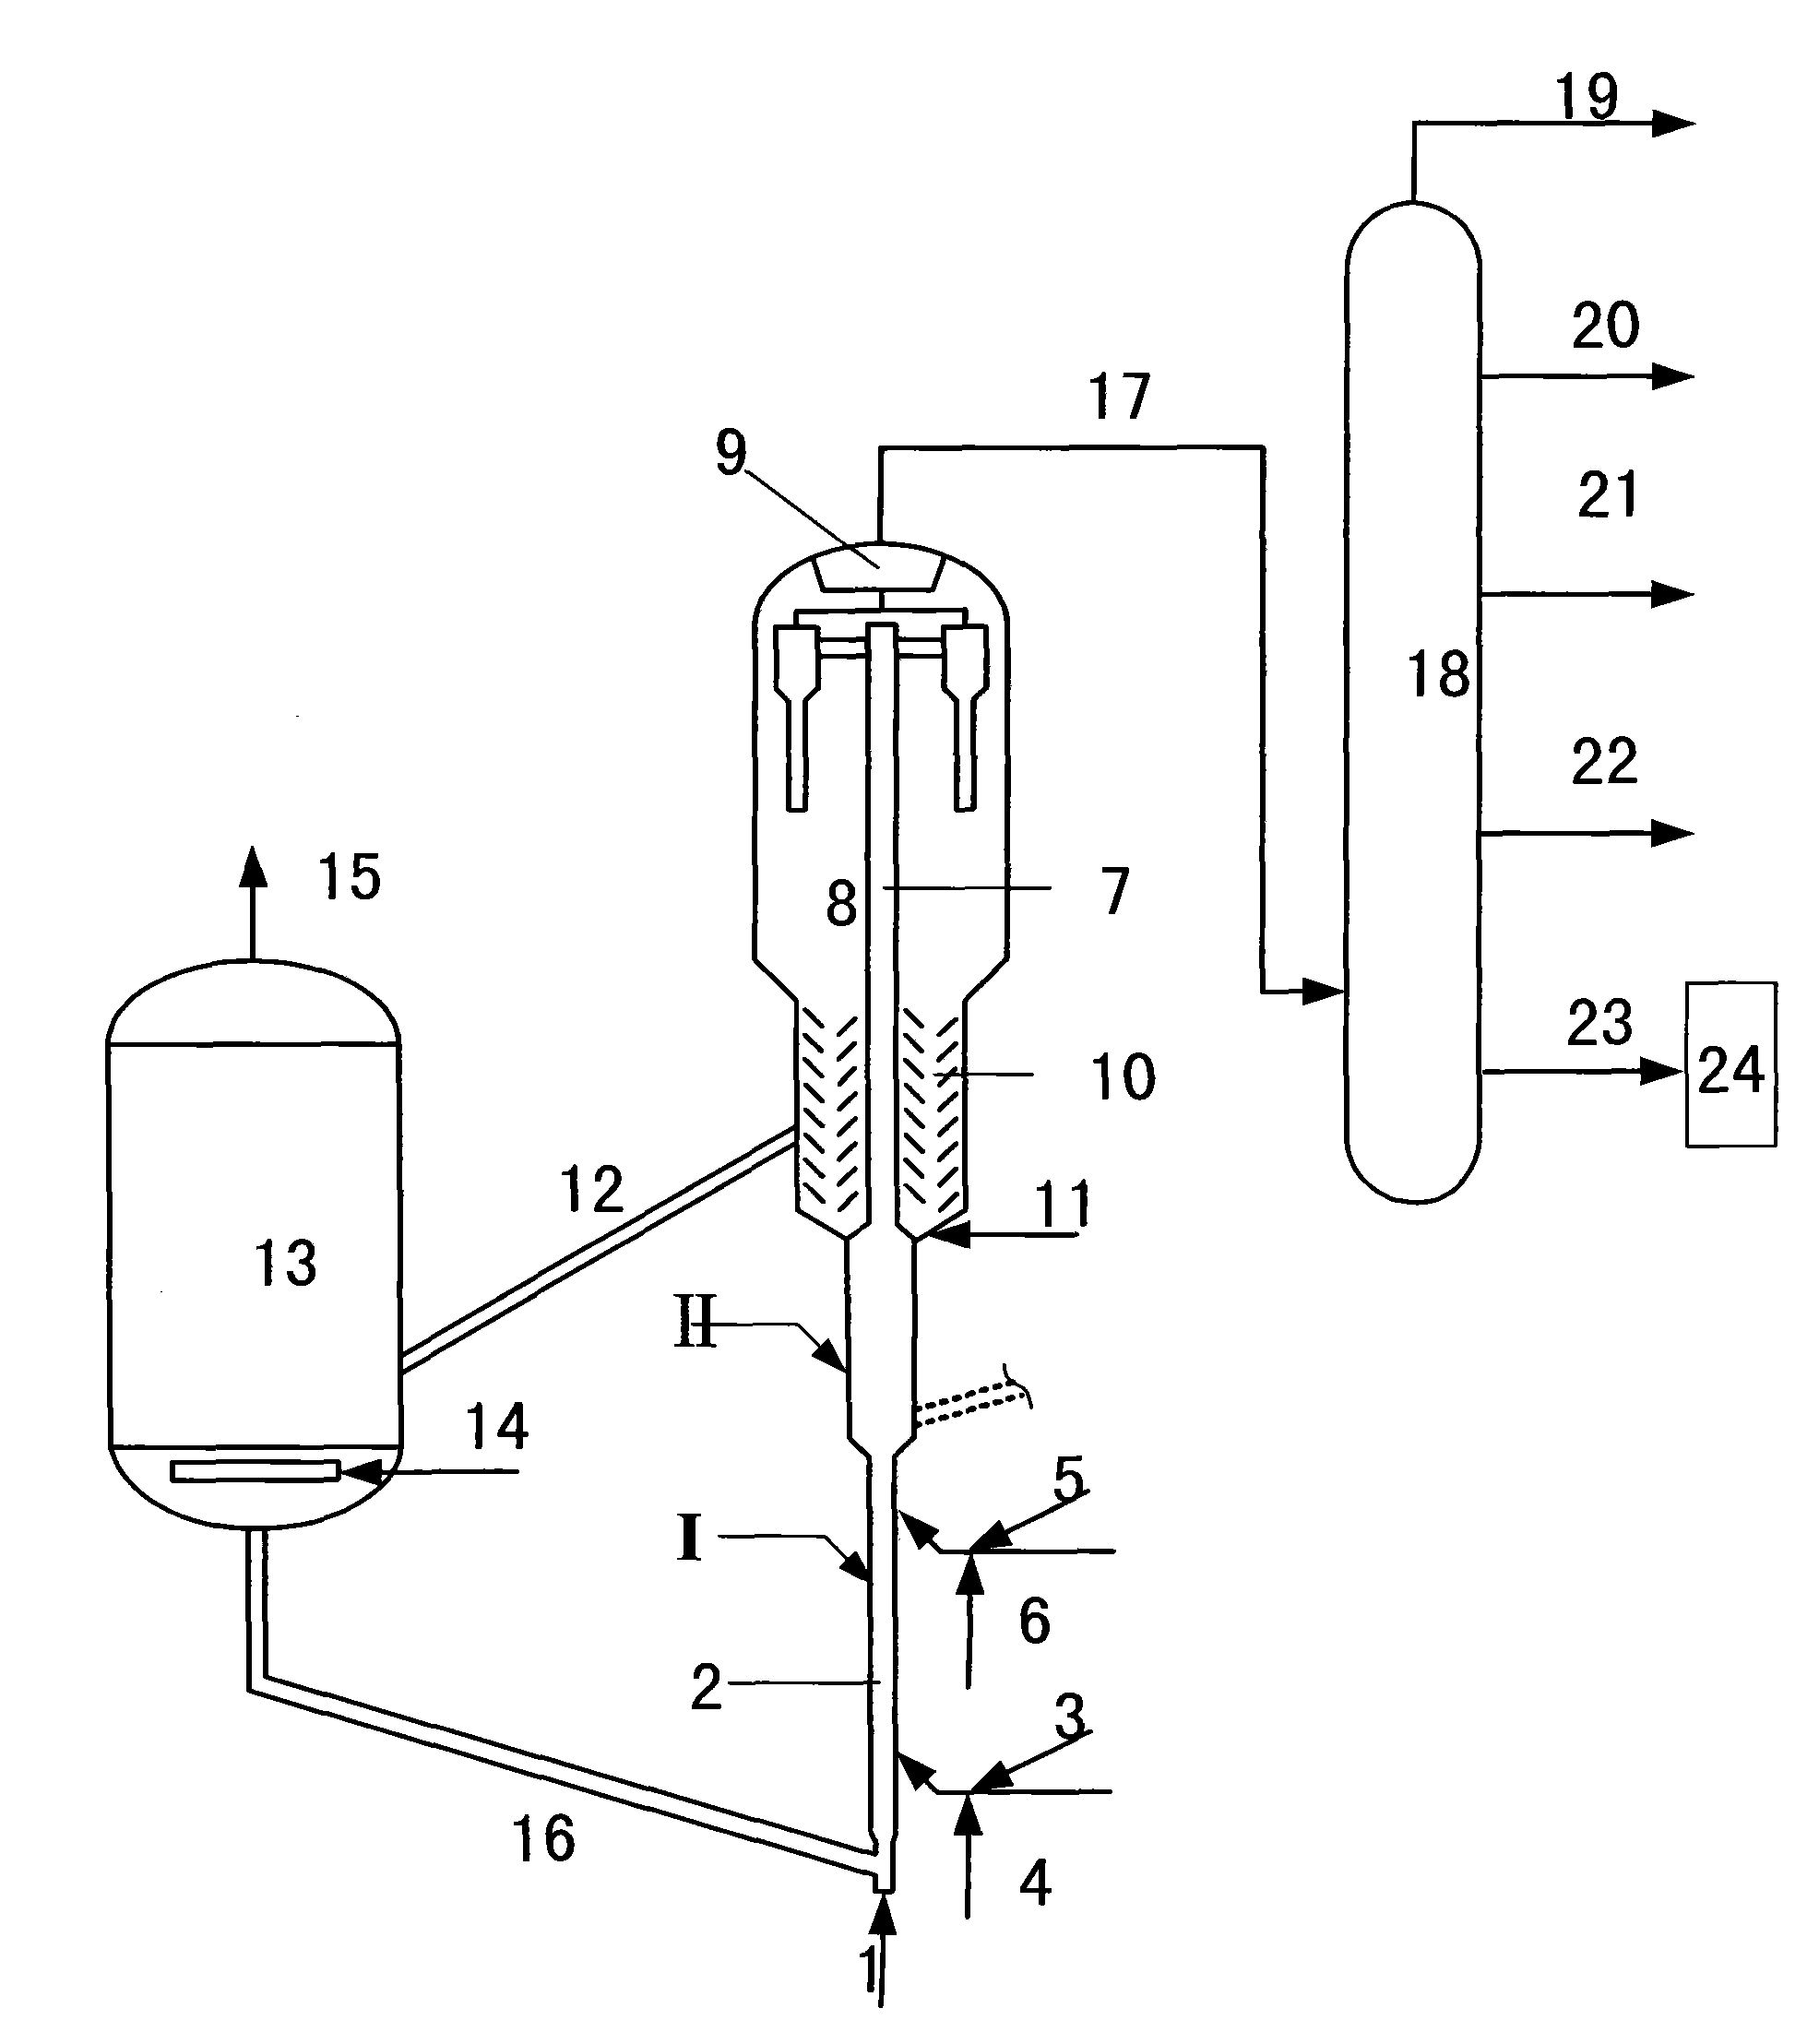 Catalytic conversion method for preparing propylene and high-octane gasoline with crude oil